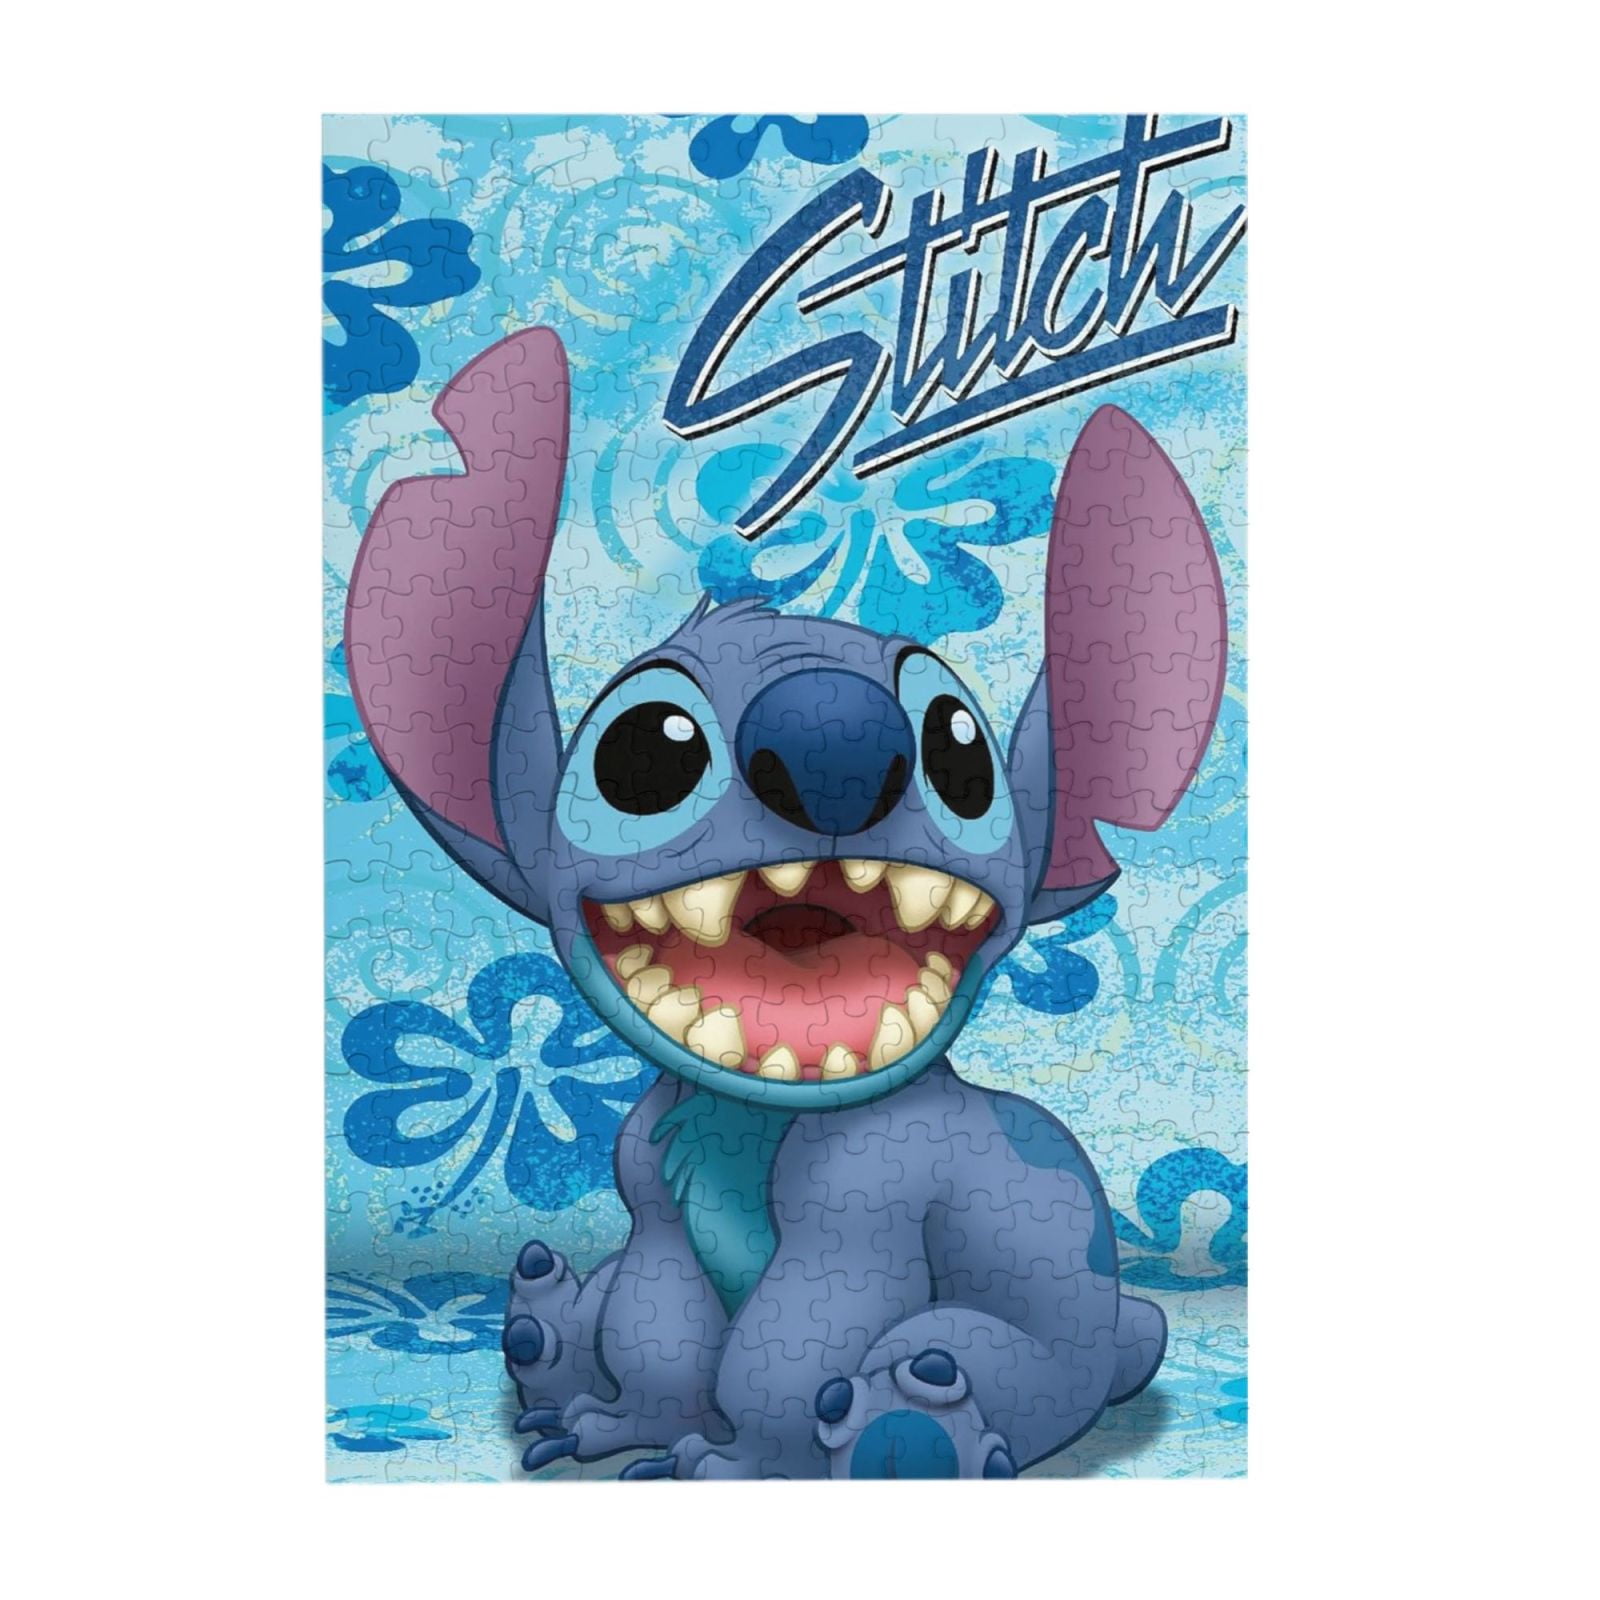 Stitch Birthday Party Puzzle Funny Cartoon Jigsaw Puzzles Lilo and